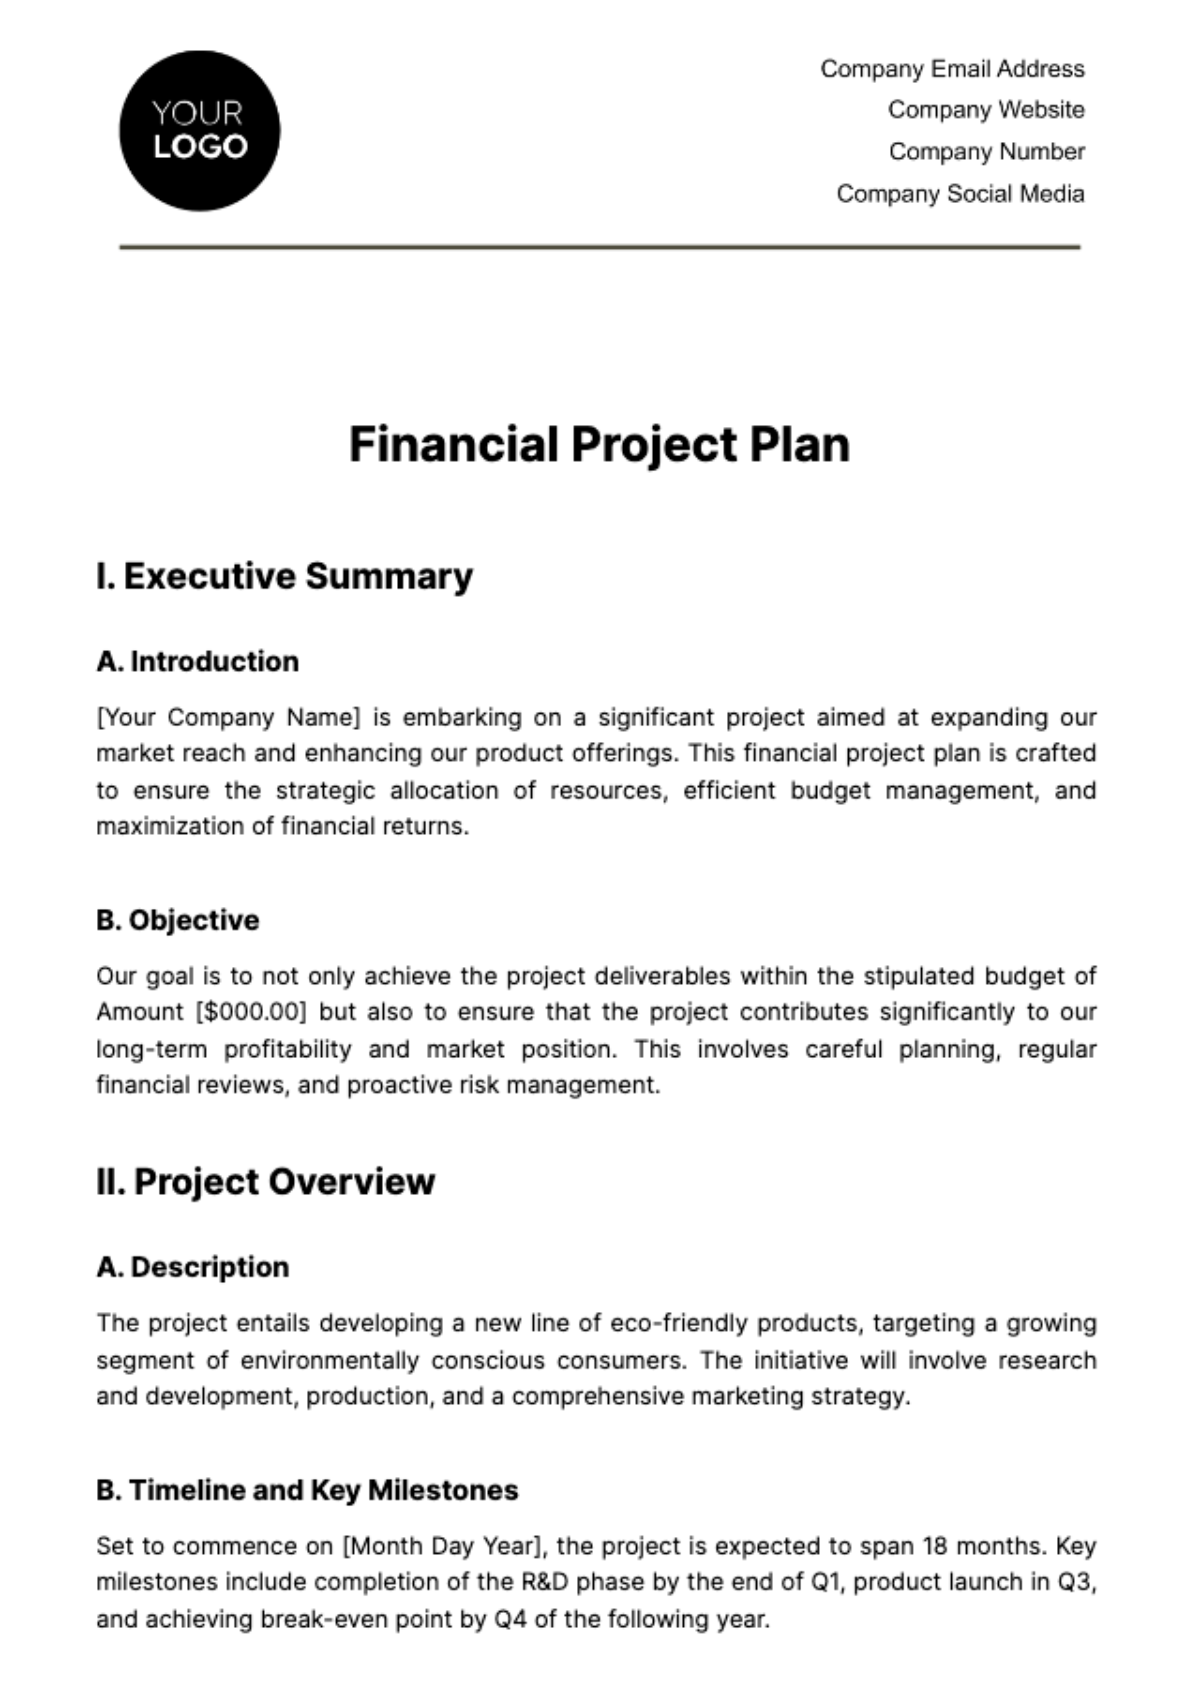 Free Financial Project Plan Template